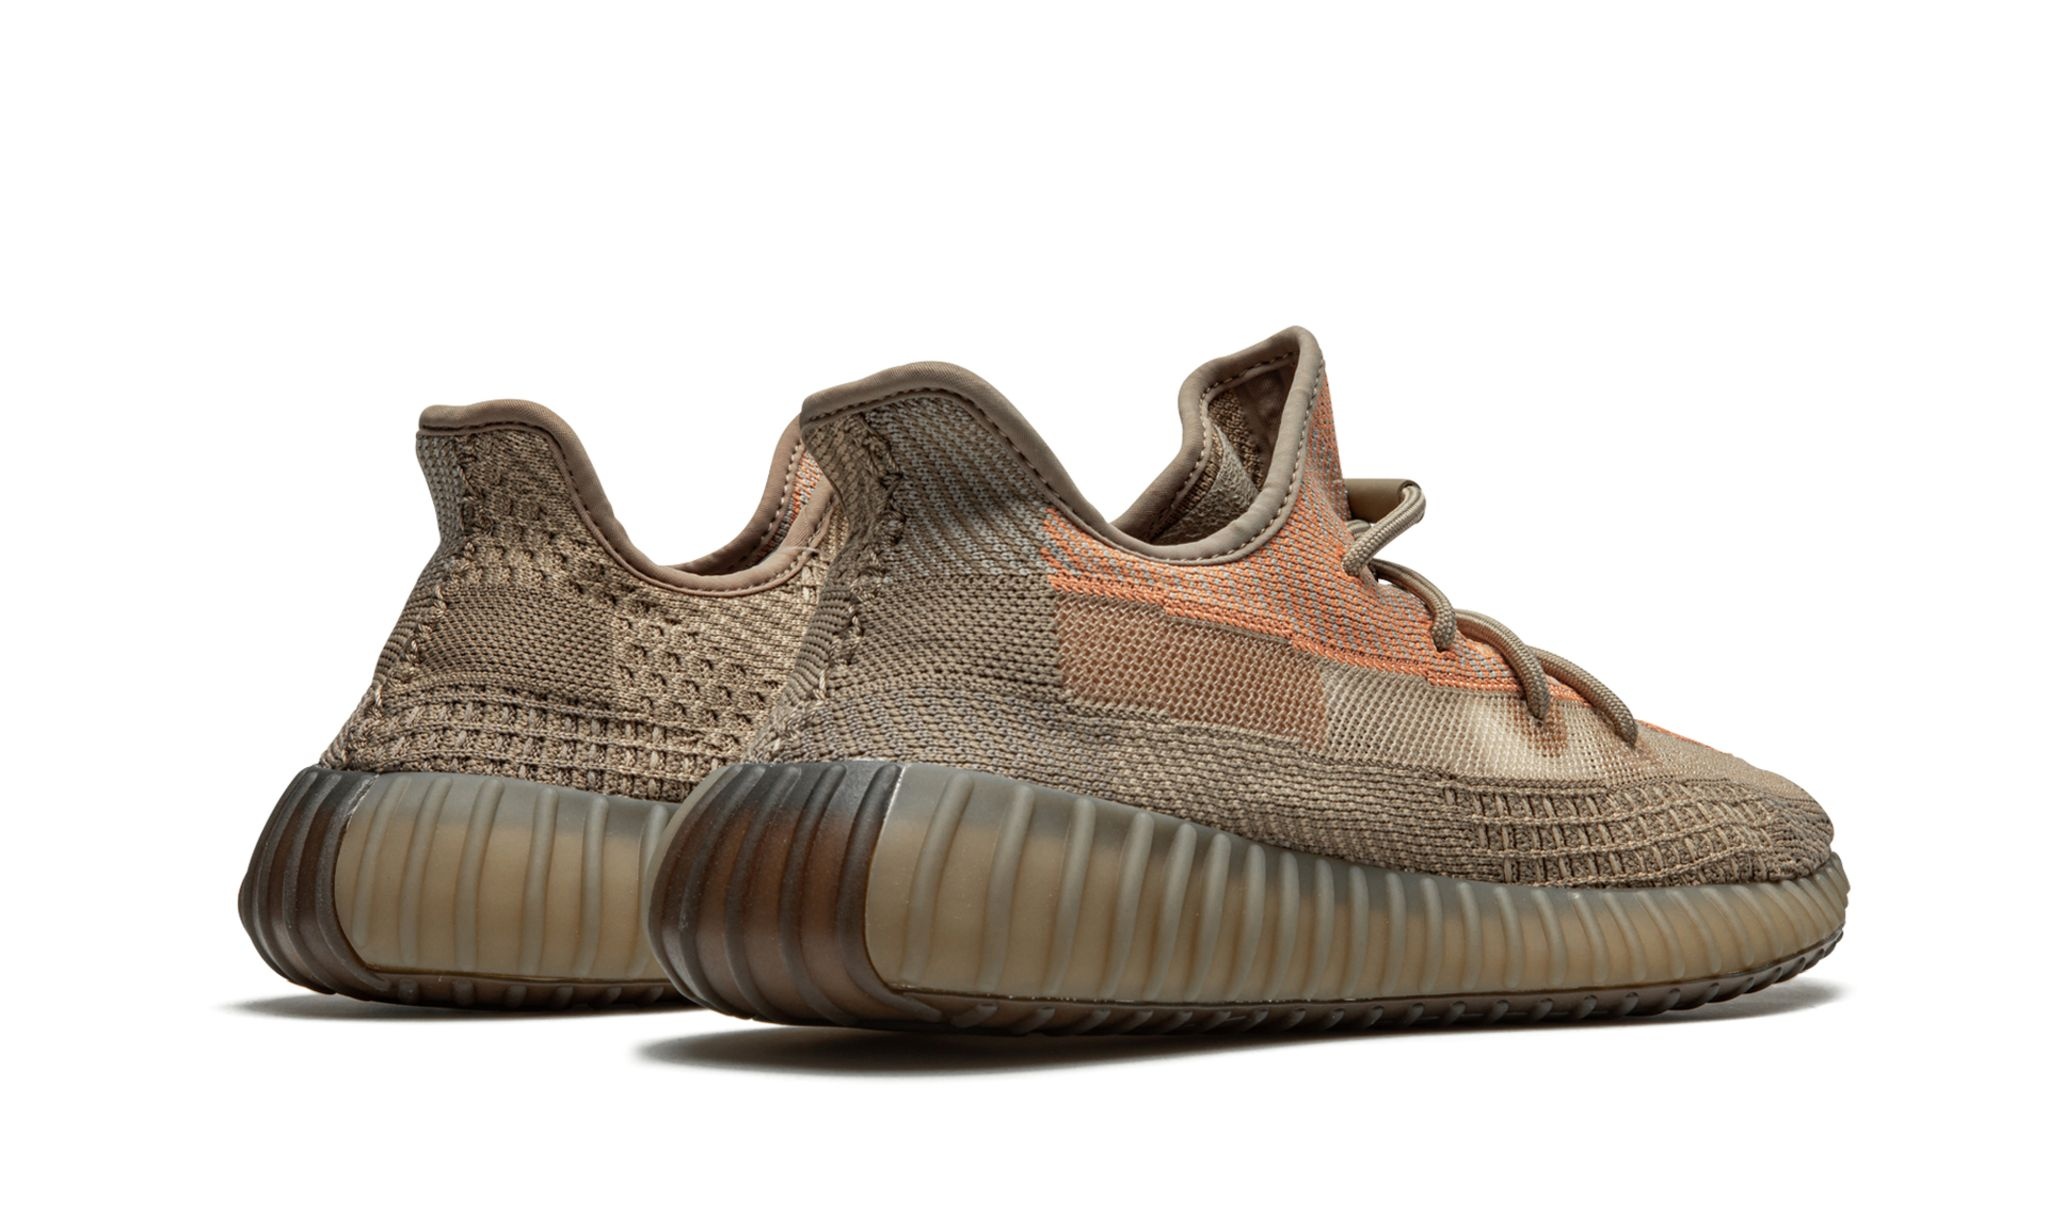 Yeezy Boost 350 V2 "Sand Taupe" - 3